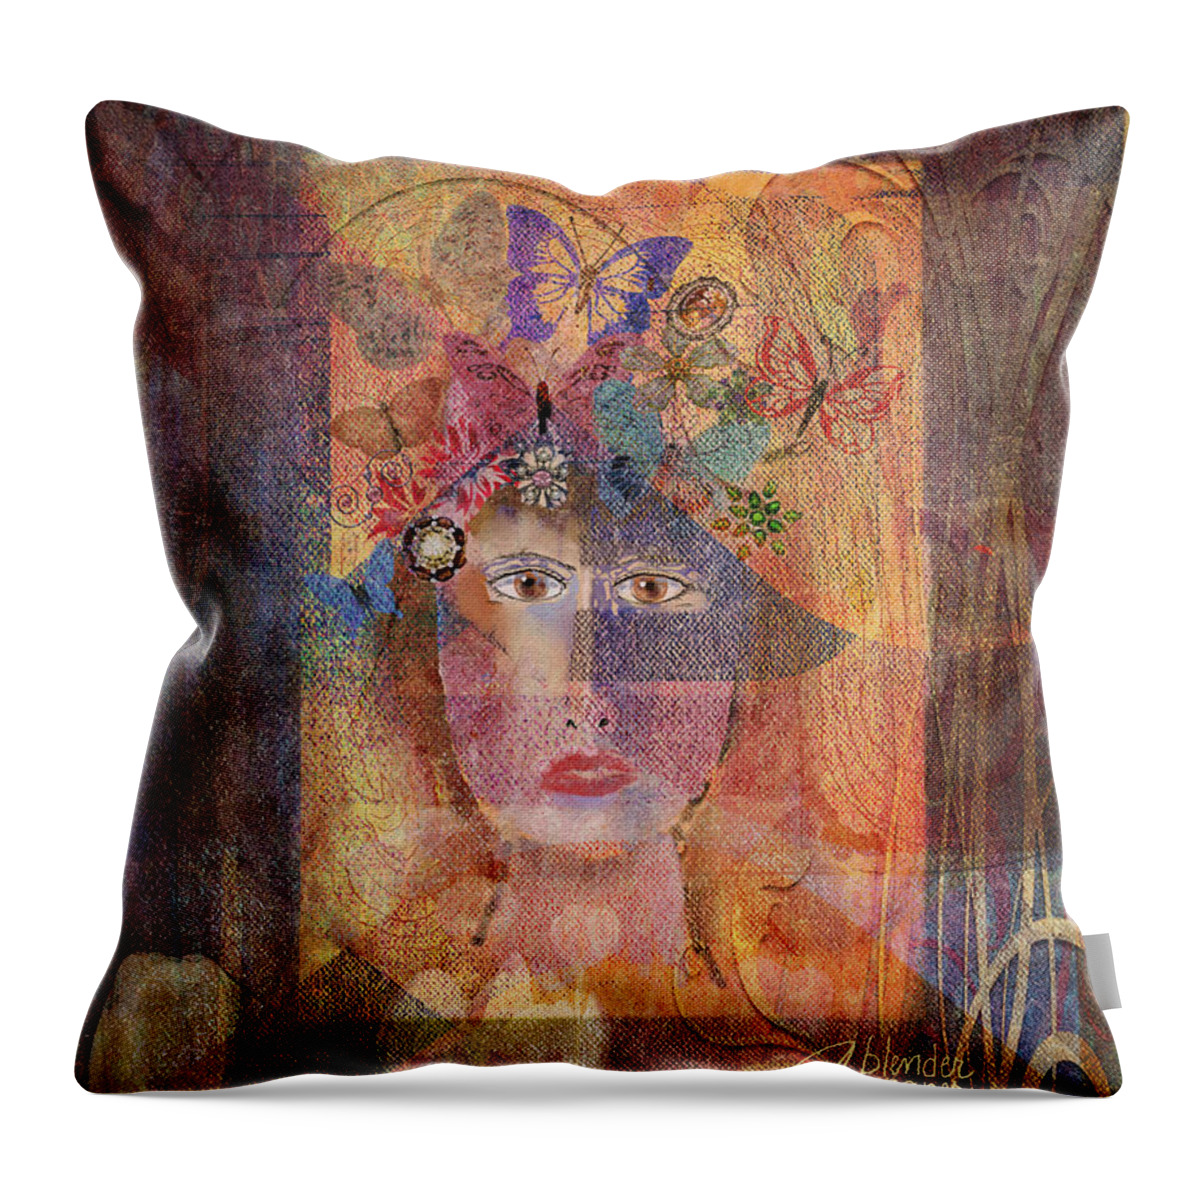 Woman Throw Pillow featuring the digital art Butterflies In Her Hair by Arline Wagner